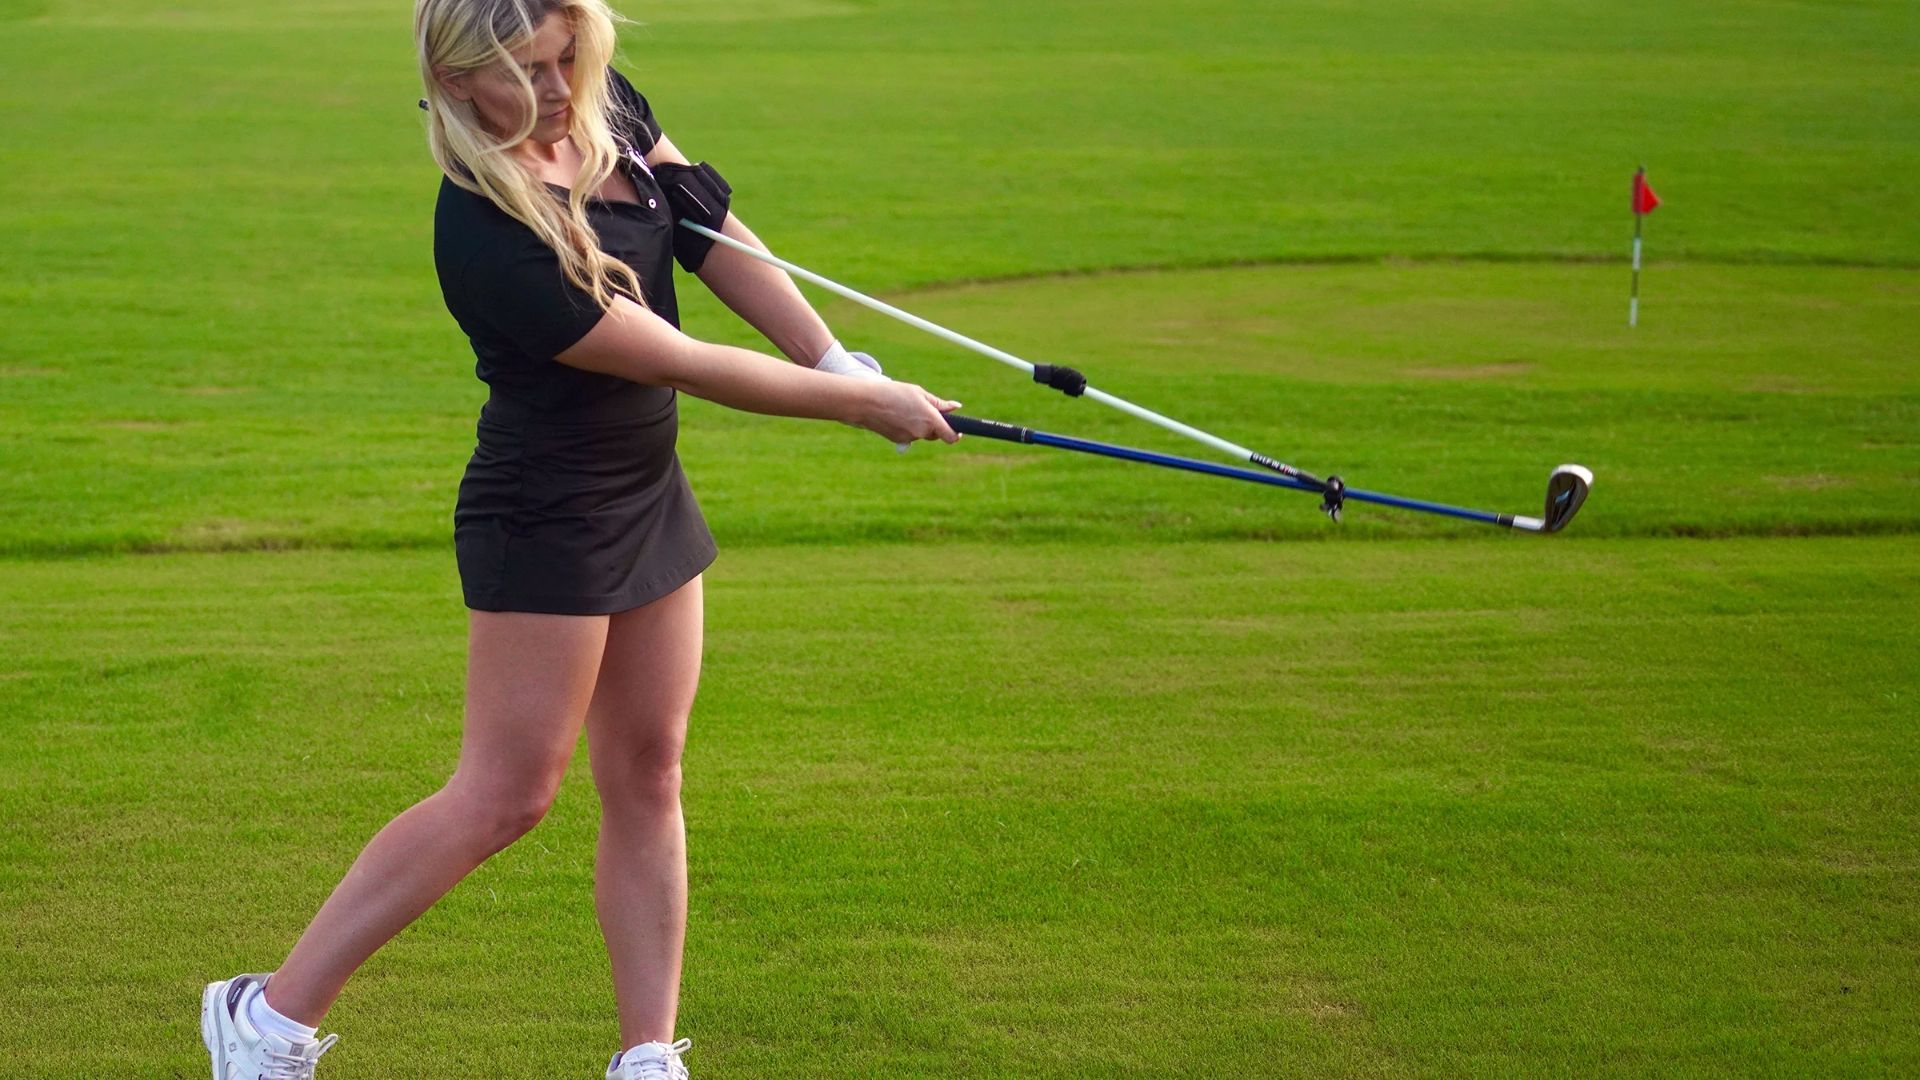 How Do Golf Training Aids Enhance Your Performance on the Course